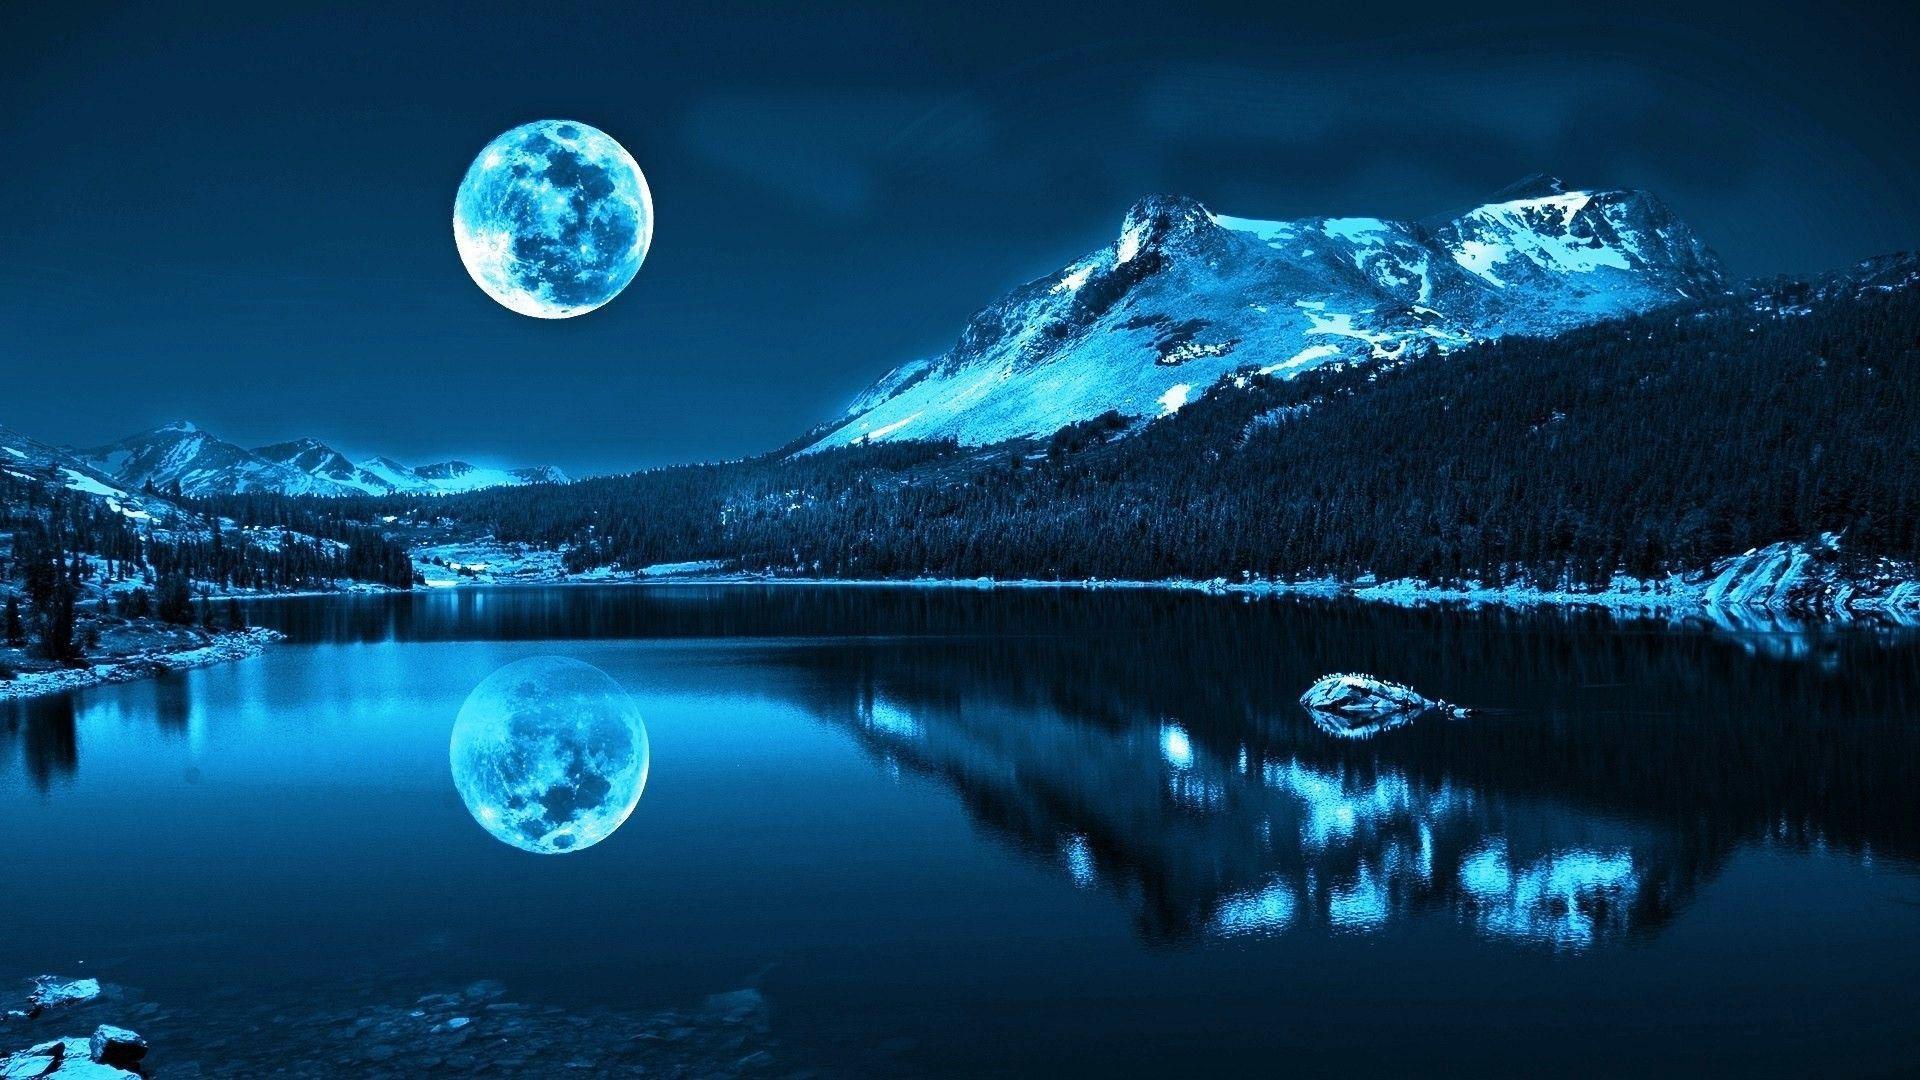 HD Moonlight In The Winter Lake At For Wallpaper, HQ Background